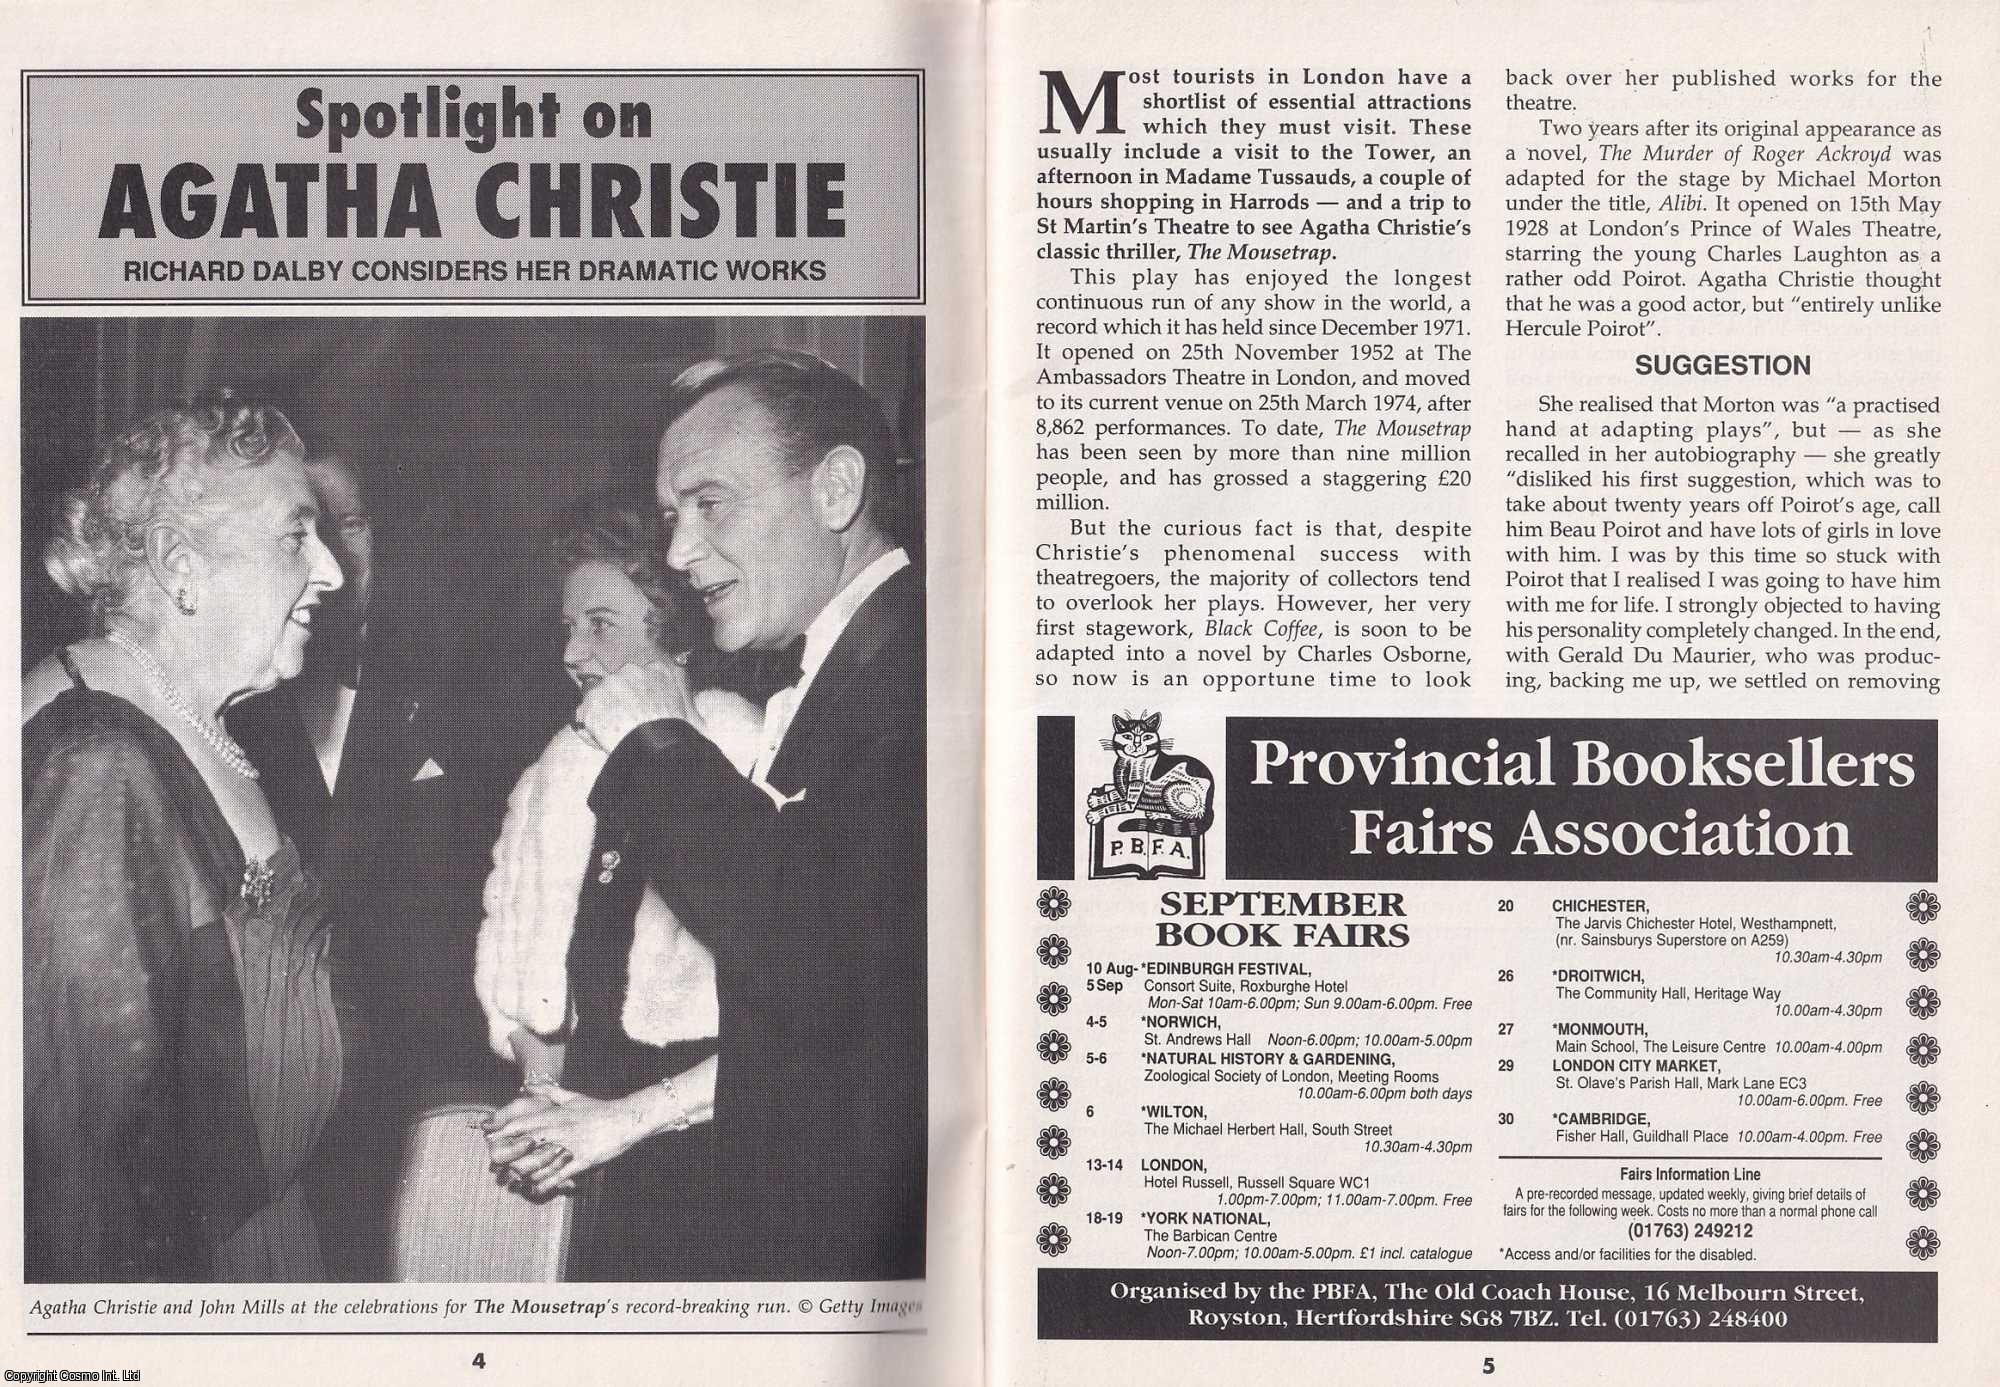 Richard Dalby - Spotlight on Agatha Christie. Considering Her Dramatic Works. This is an original article separated from an issue of The Book & Magazine Collector publication.